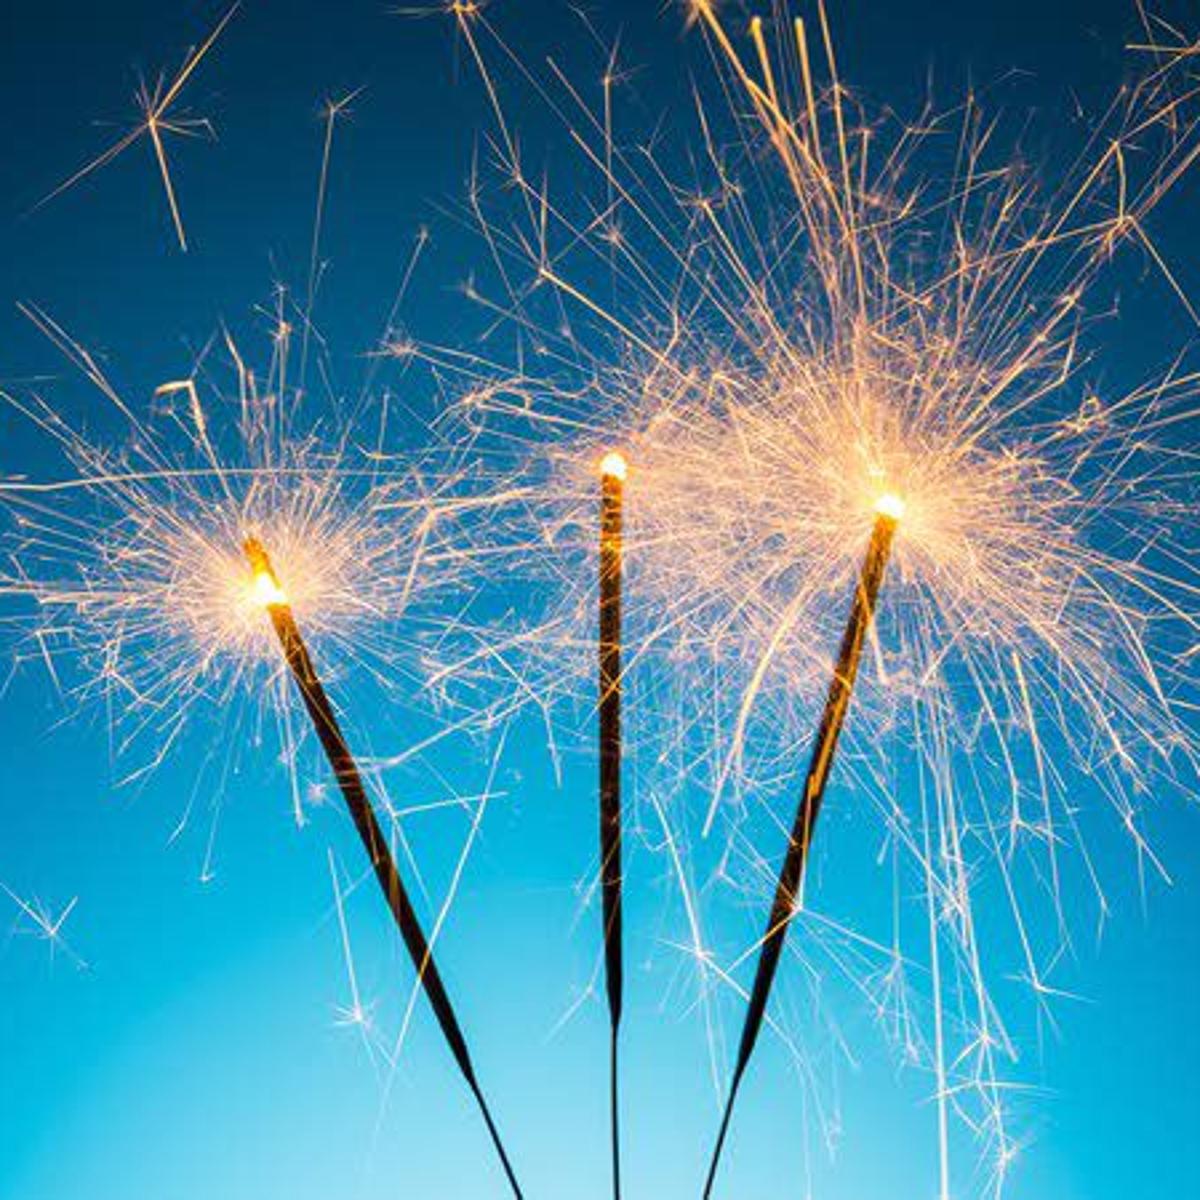 Use caution with fireworks this Independence Day | News | kenoshanews.com